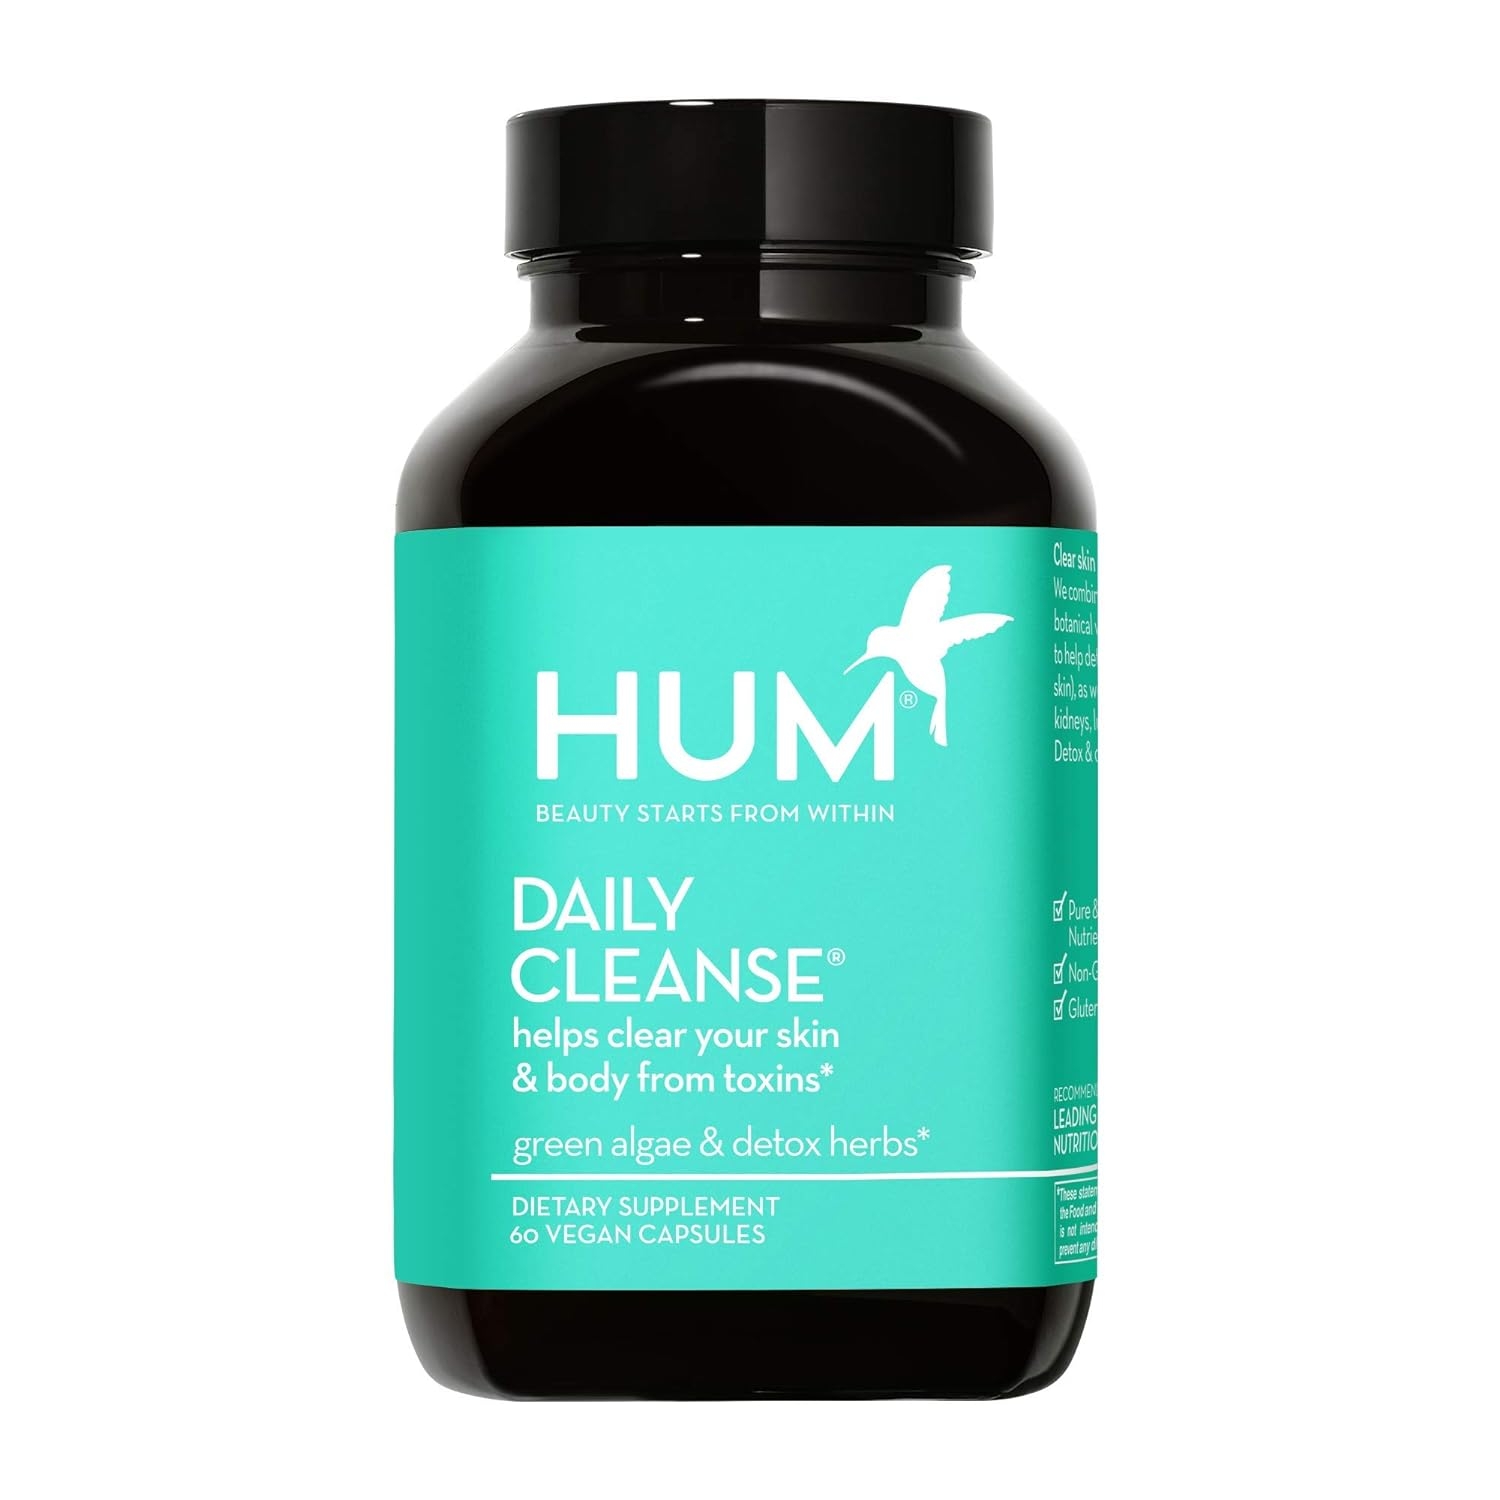 HUM Daily Cleanse Skin Supplement - Support for Clear Skin & Improved Digestion with Organic Algae, Detoxifying Herbs, Vitamins & Minerals - Skin Supplement for Women (60 Vegan Capsules)